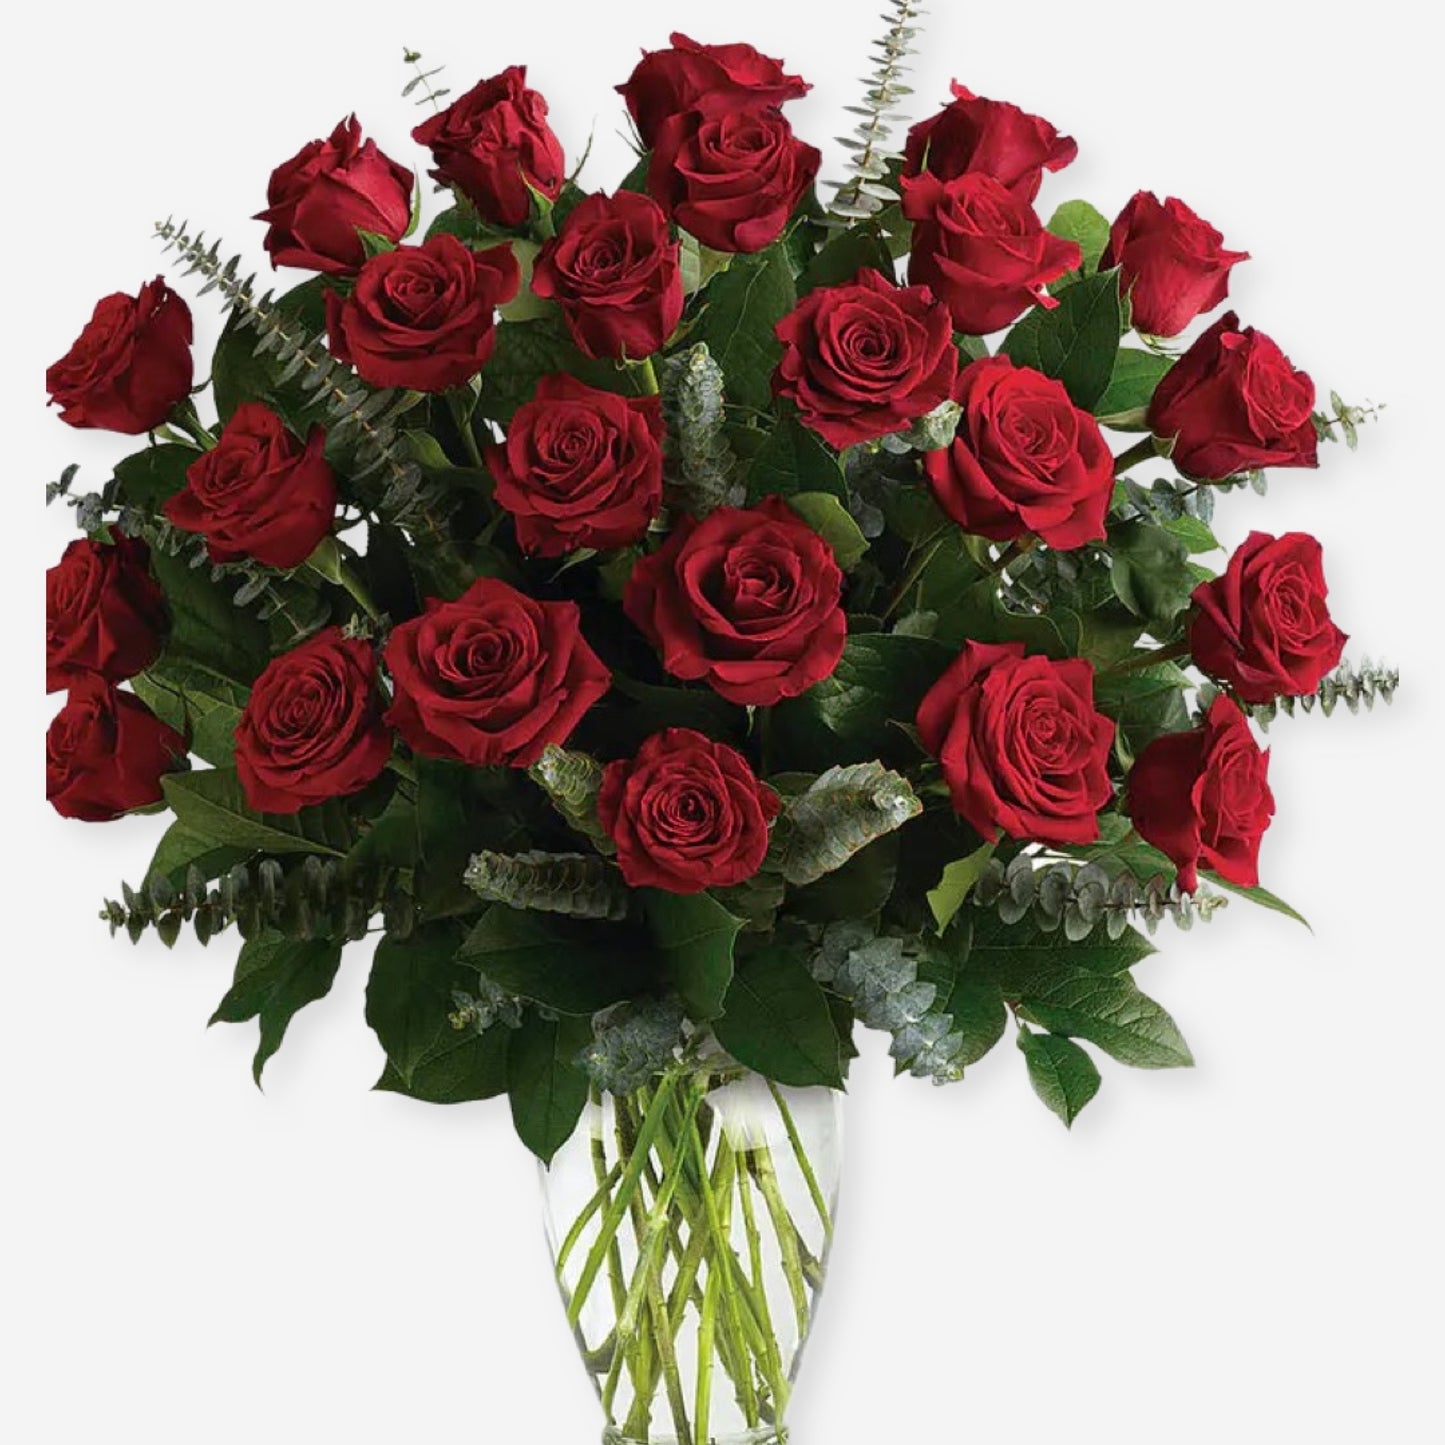 Red roses bouquet "Amour"